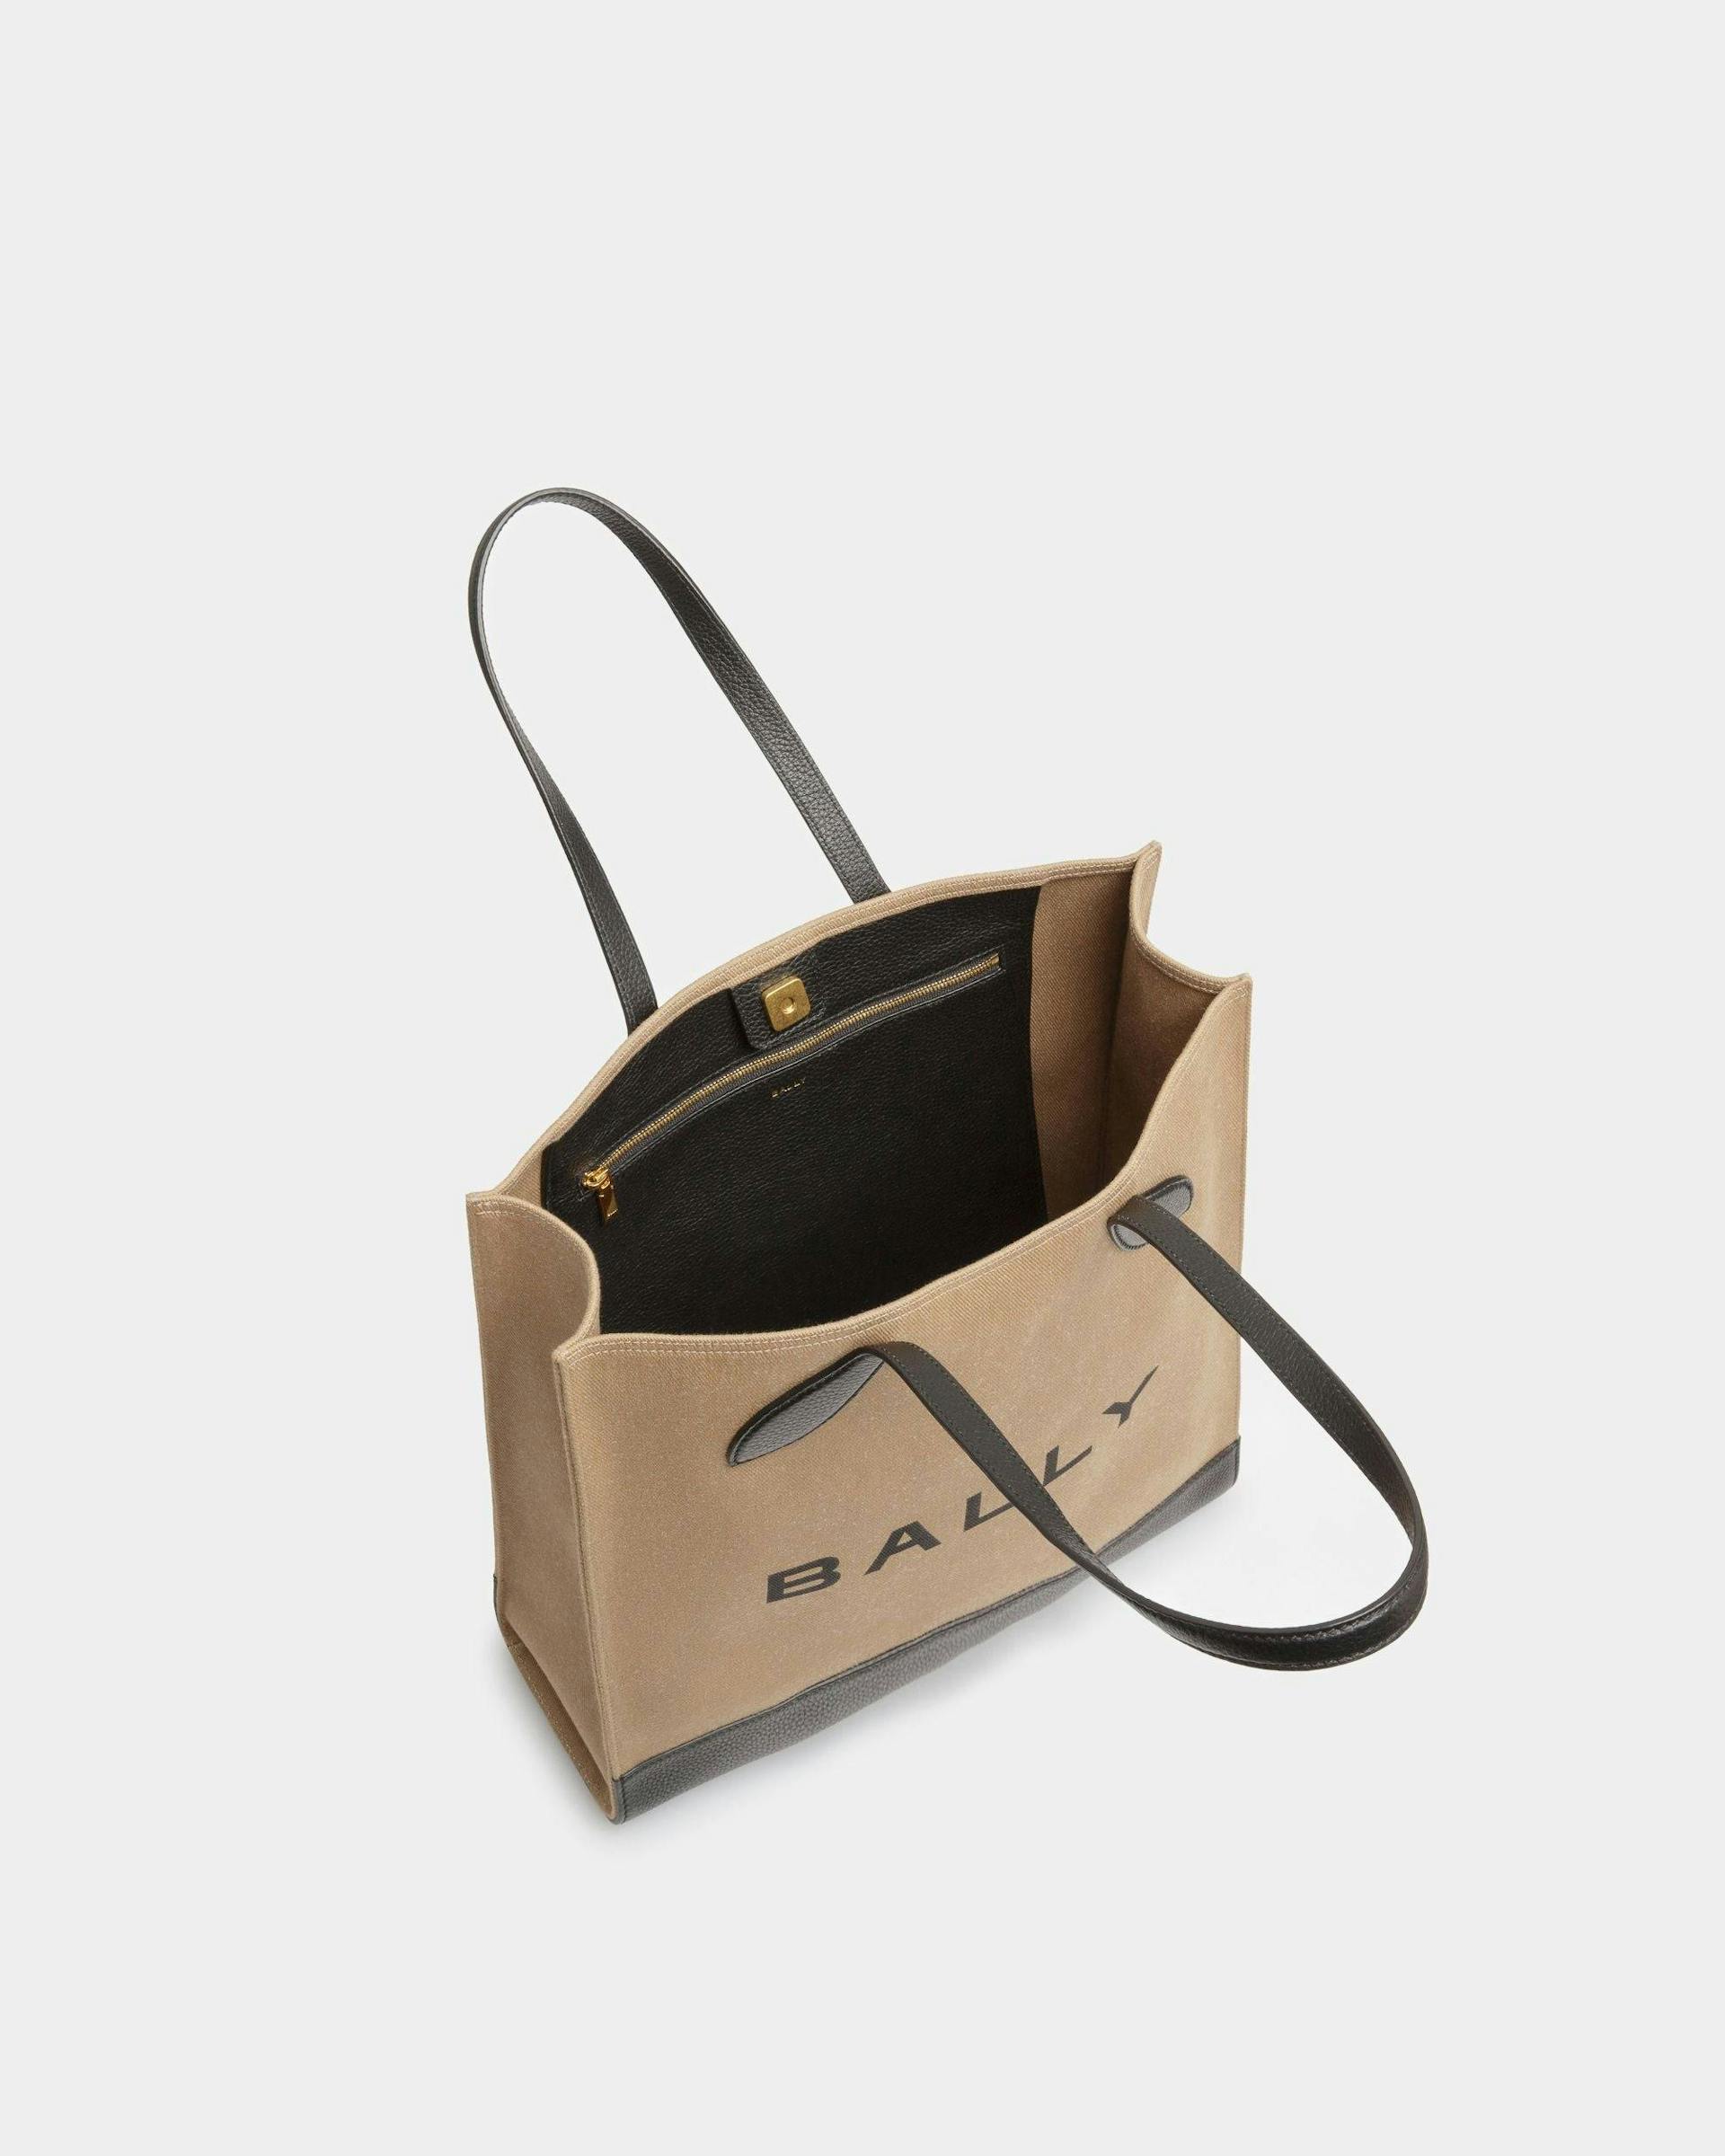 Bar Tote Bag In Sand And Black Fabric - Women's - Bally - 05